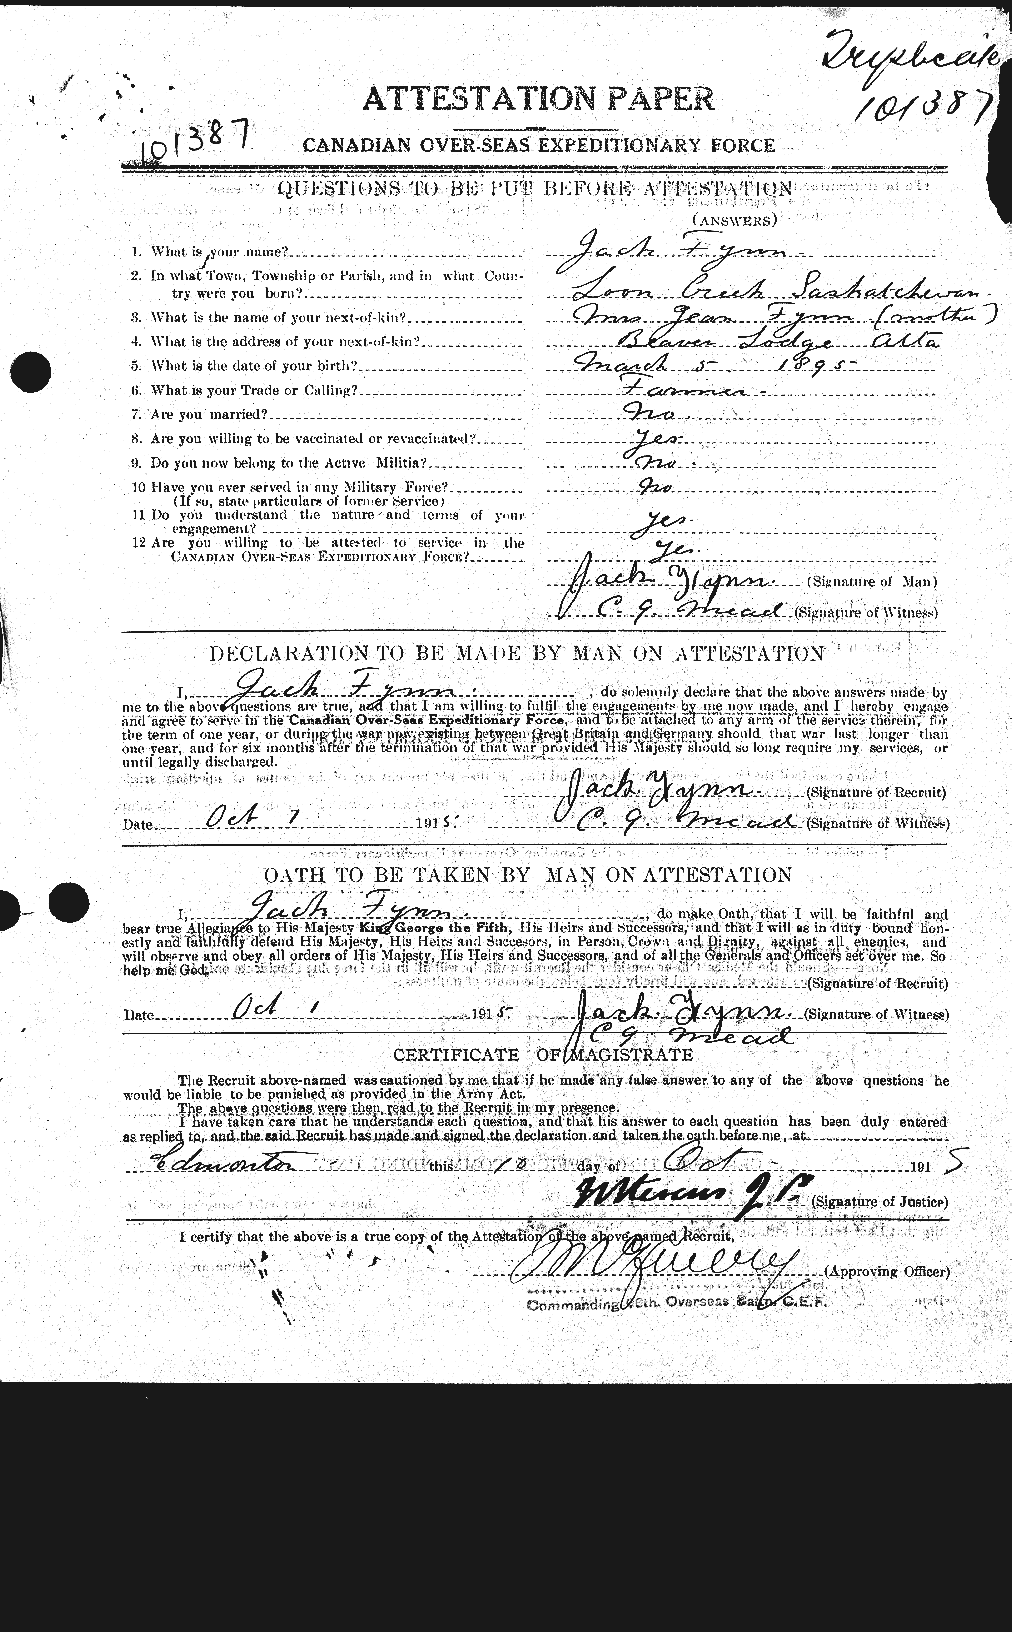 Personnel Records of the First World War - CEF 338888a